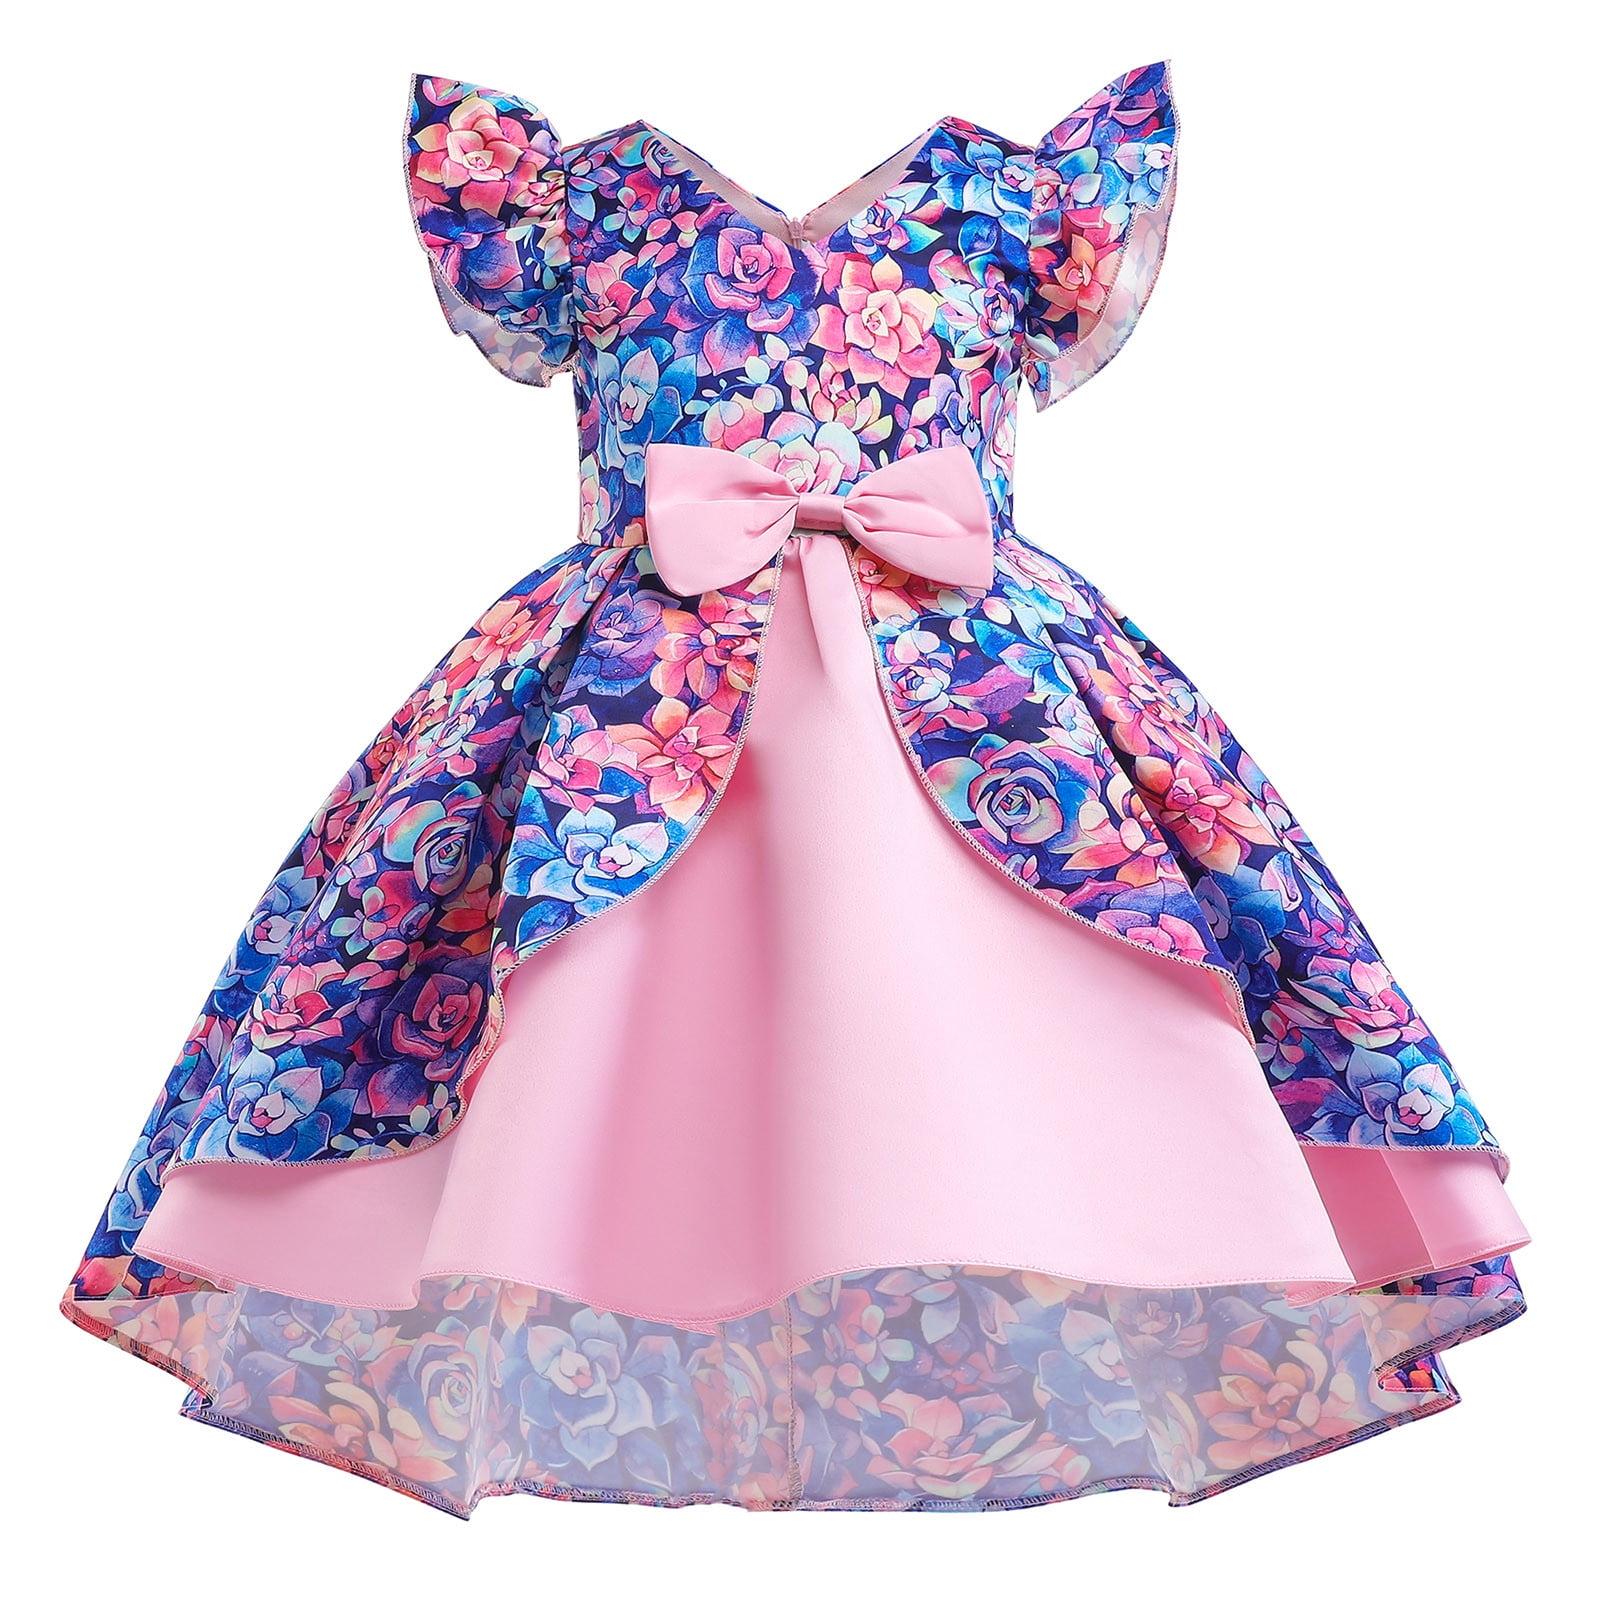 About us - girls party dresses 